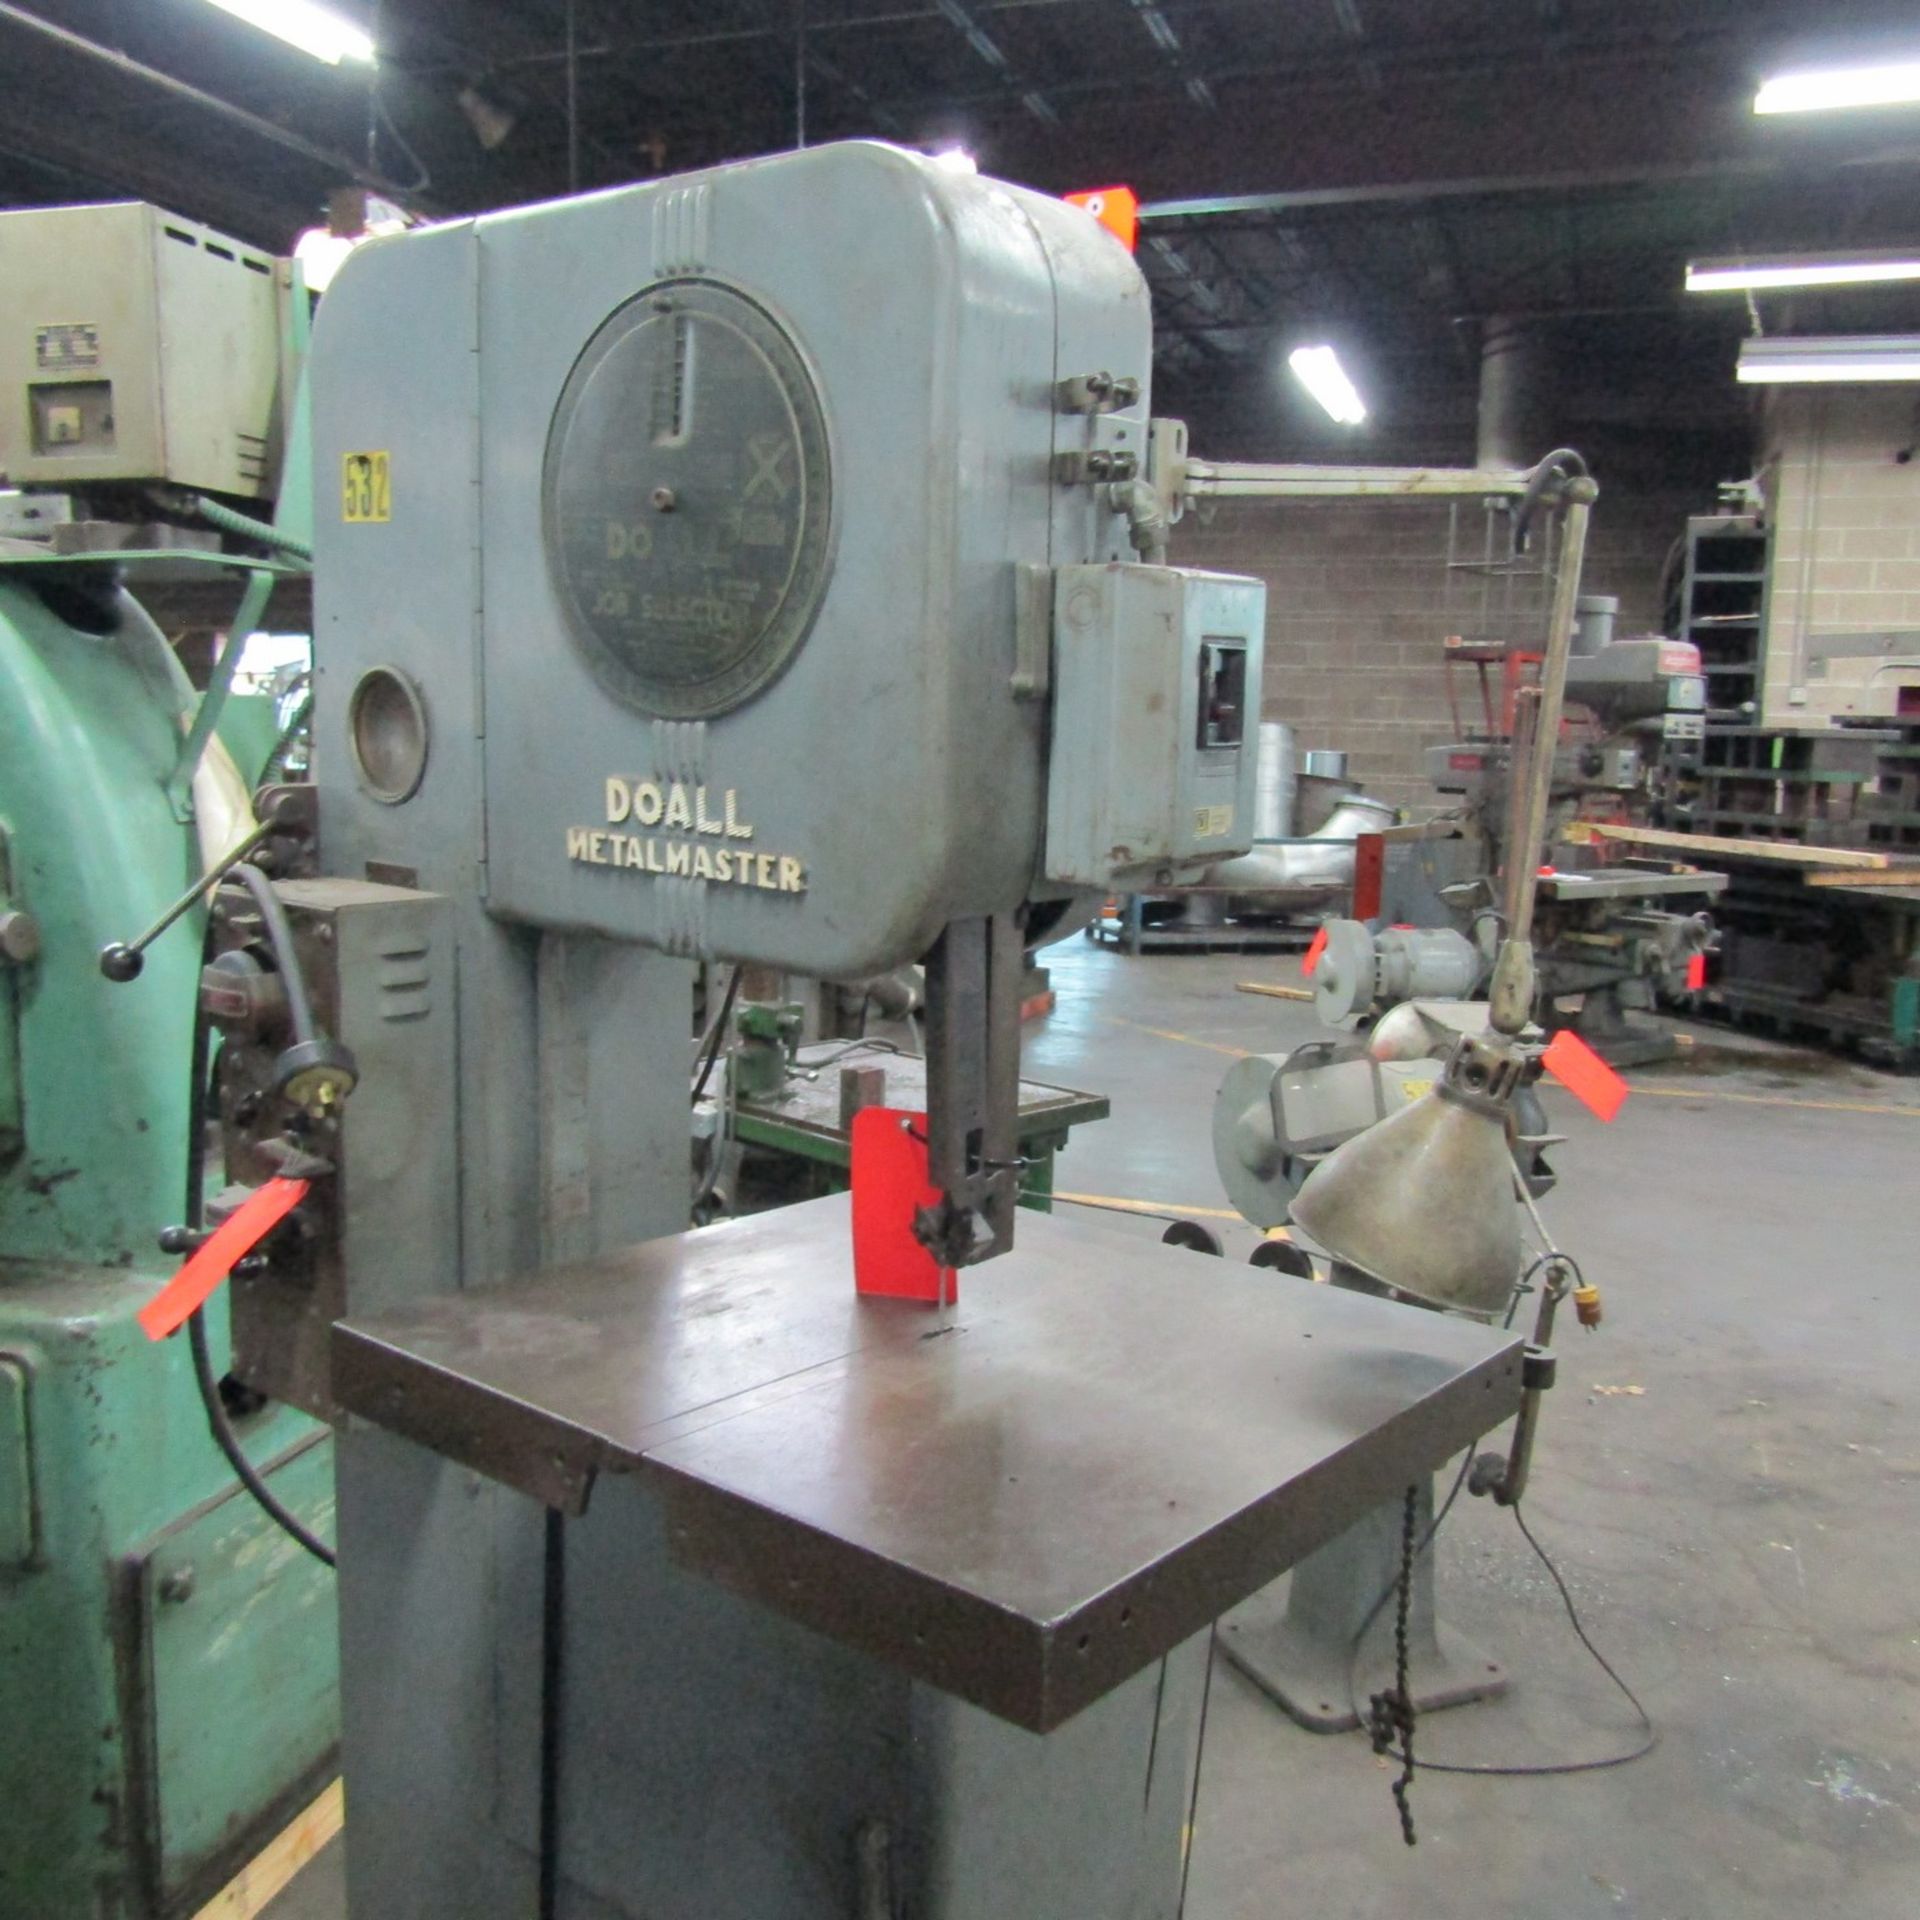 DoAll 16 in. Model Metalmaster Job Selector Tilting Table Vertical Band Saw, S/N: 423406; with Model - Image 3 of 5